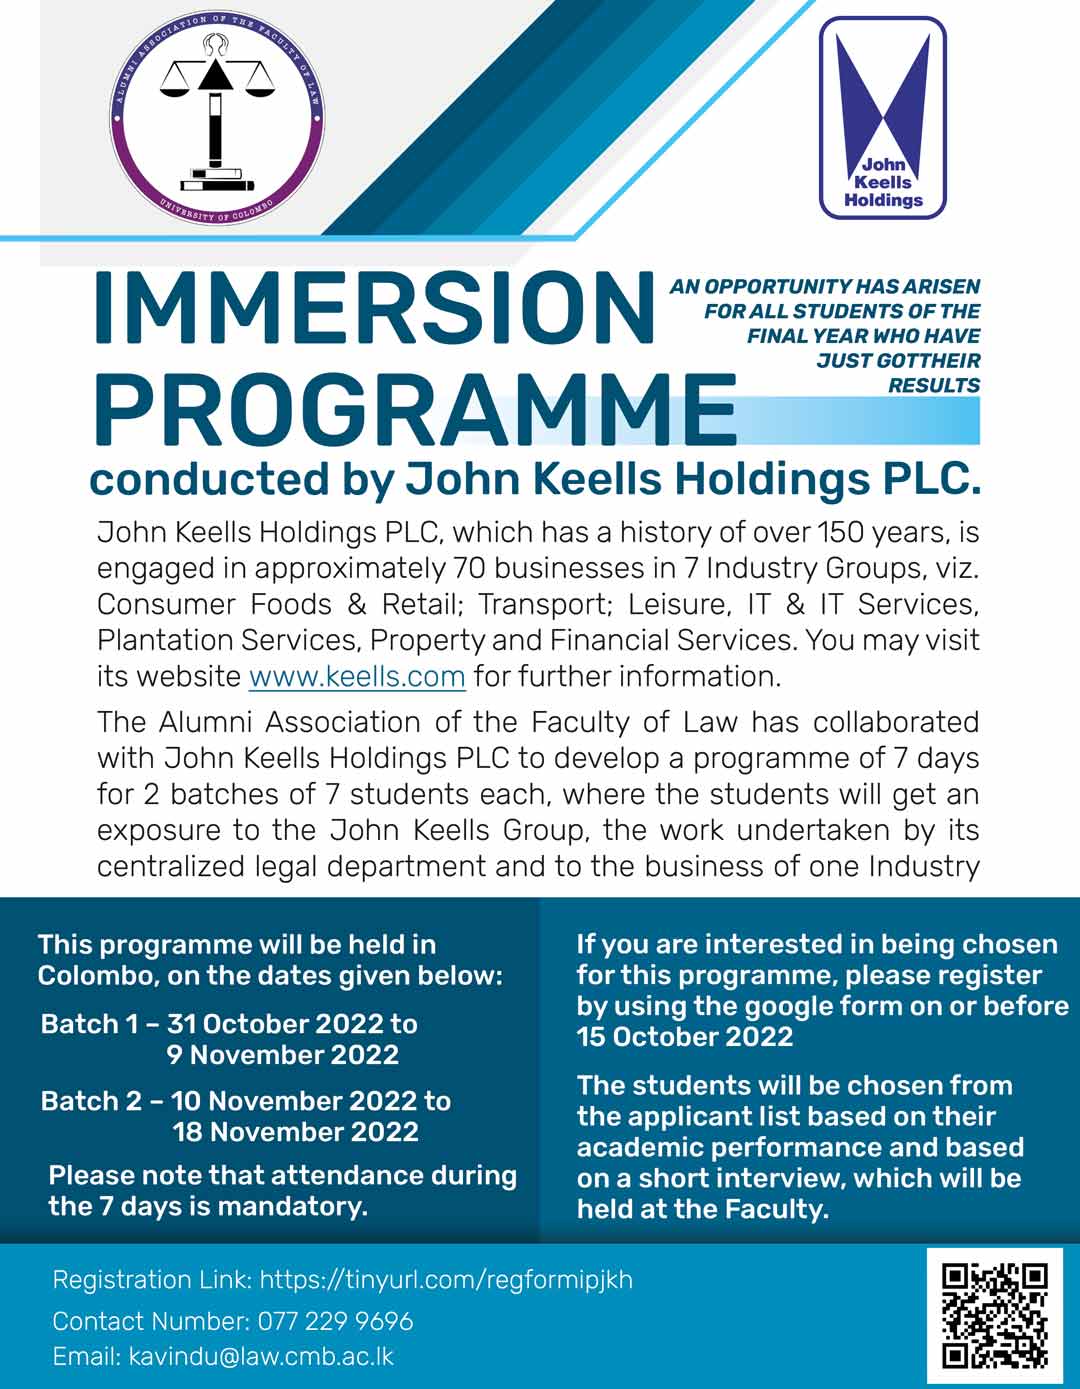 Immersion Programme with JKH